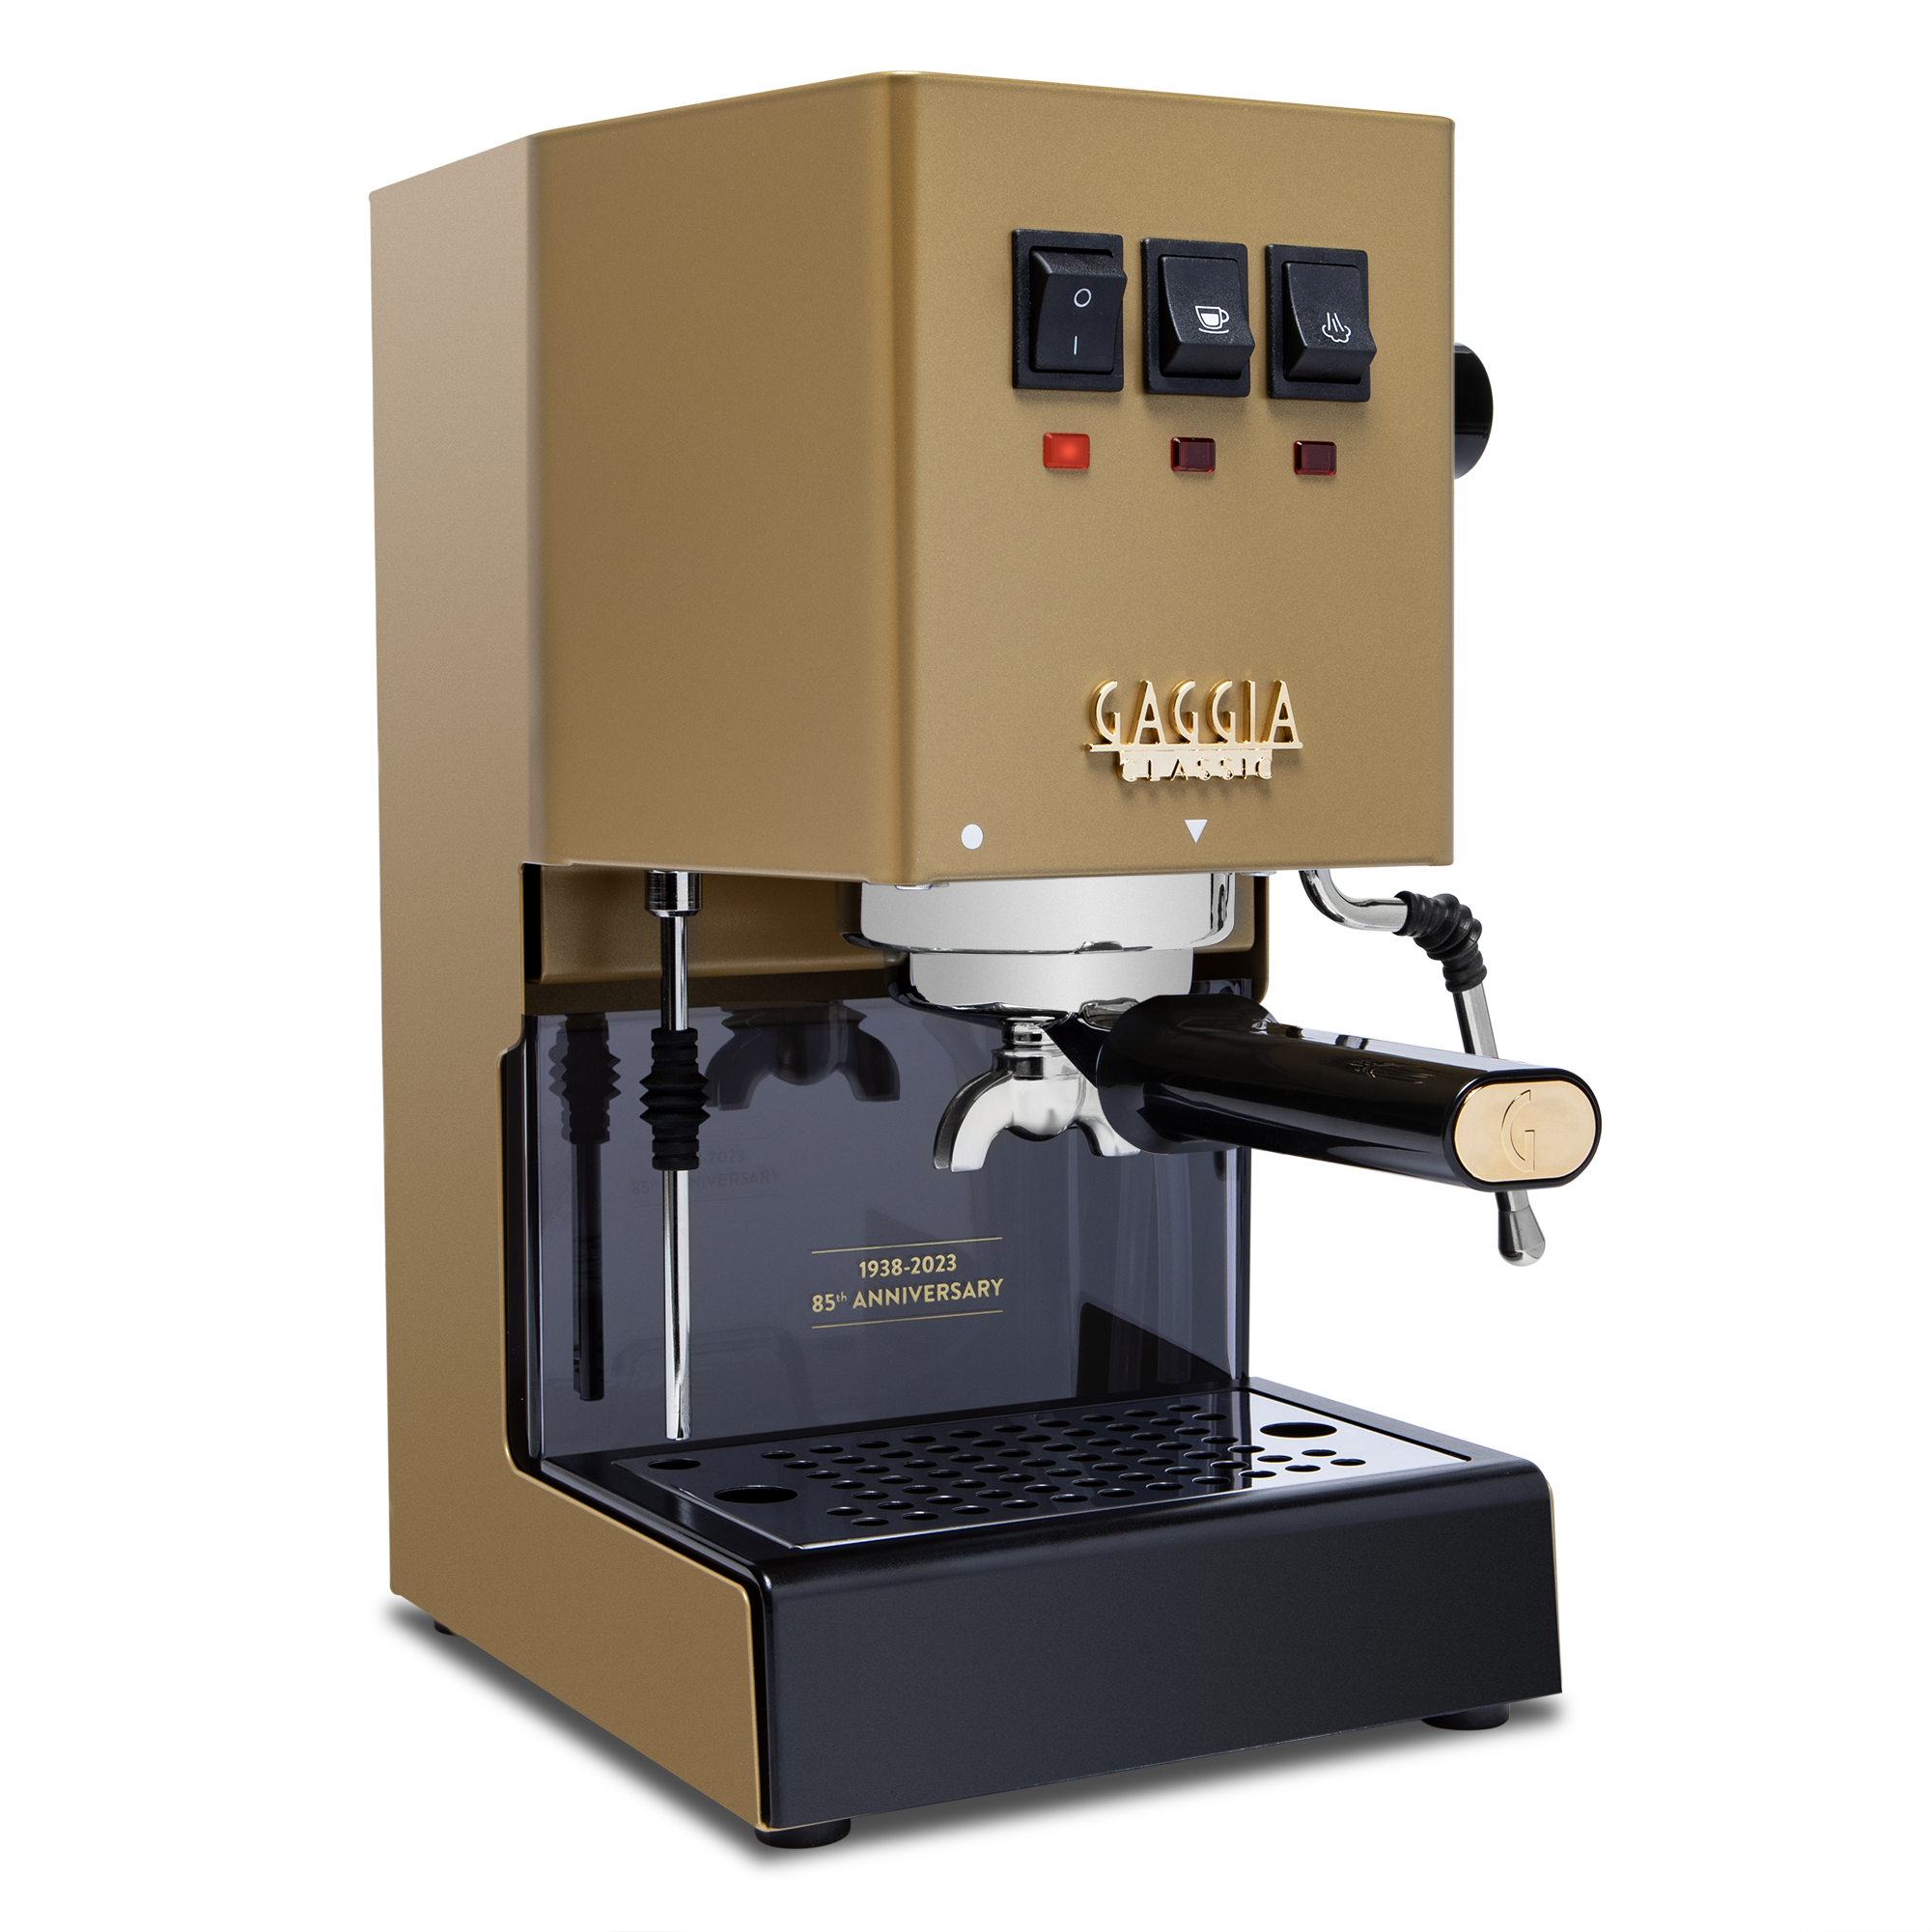 Gaggia Classic Pro in Stainless Steel - Zebra Wood